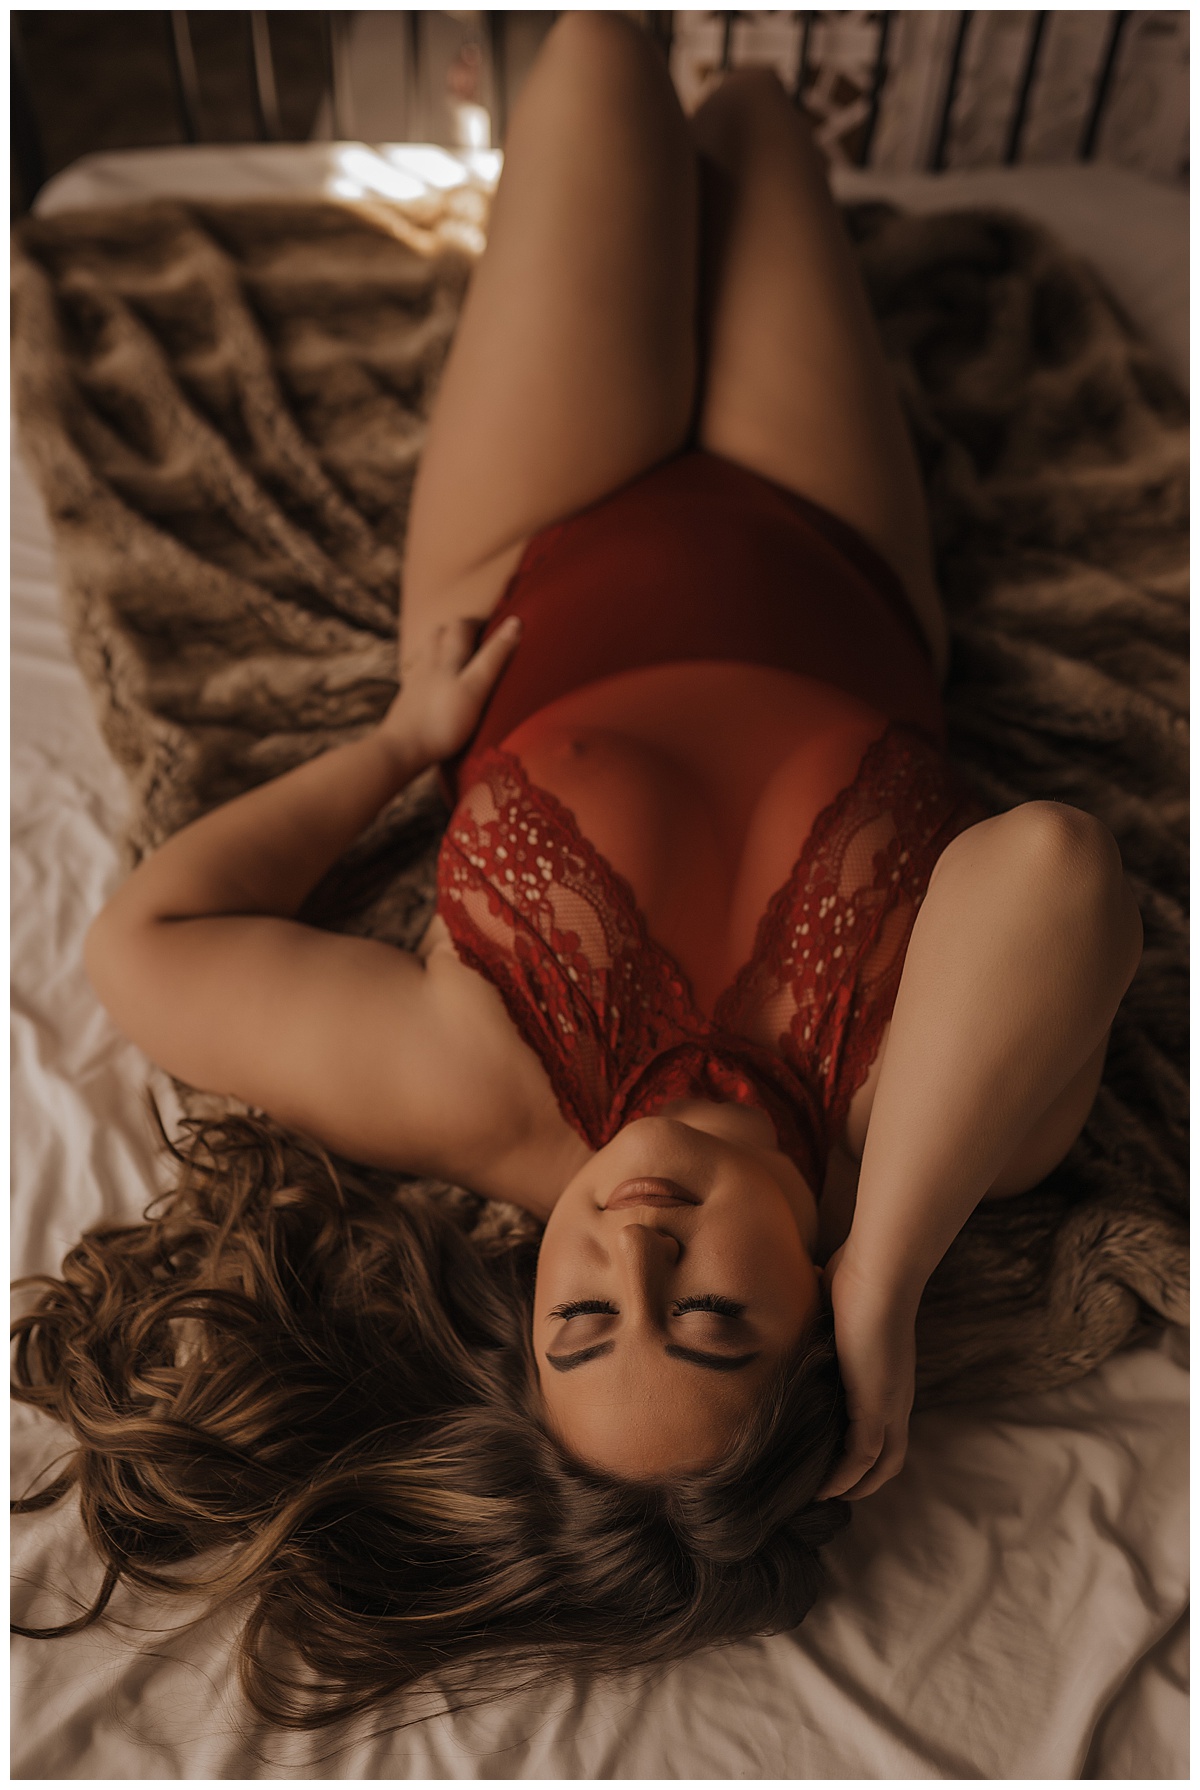 Woman lays down in red lingerie after finding Places to Buy Lingerie For Boudoir Session 